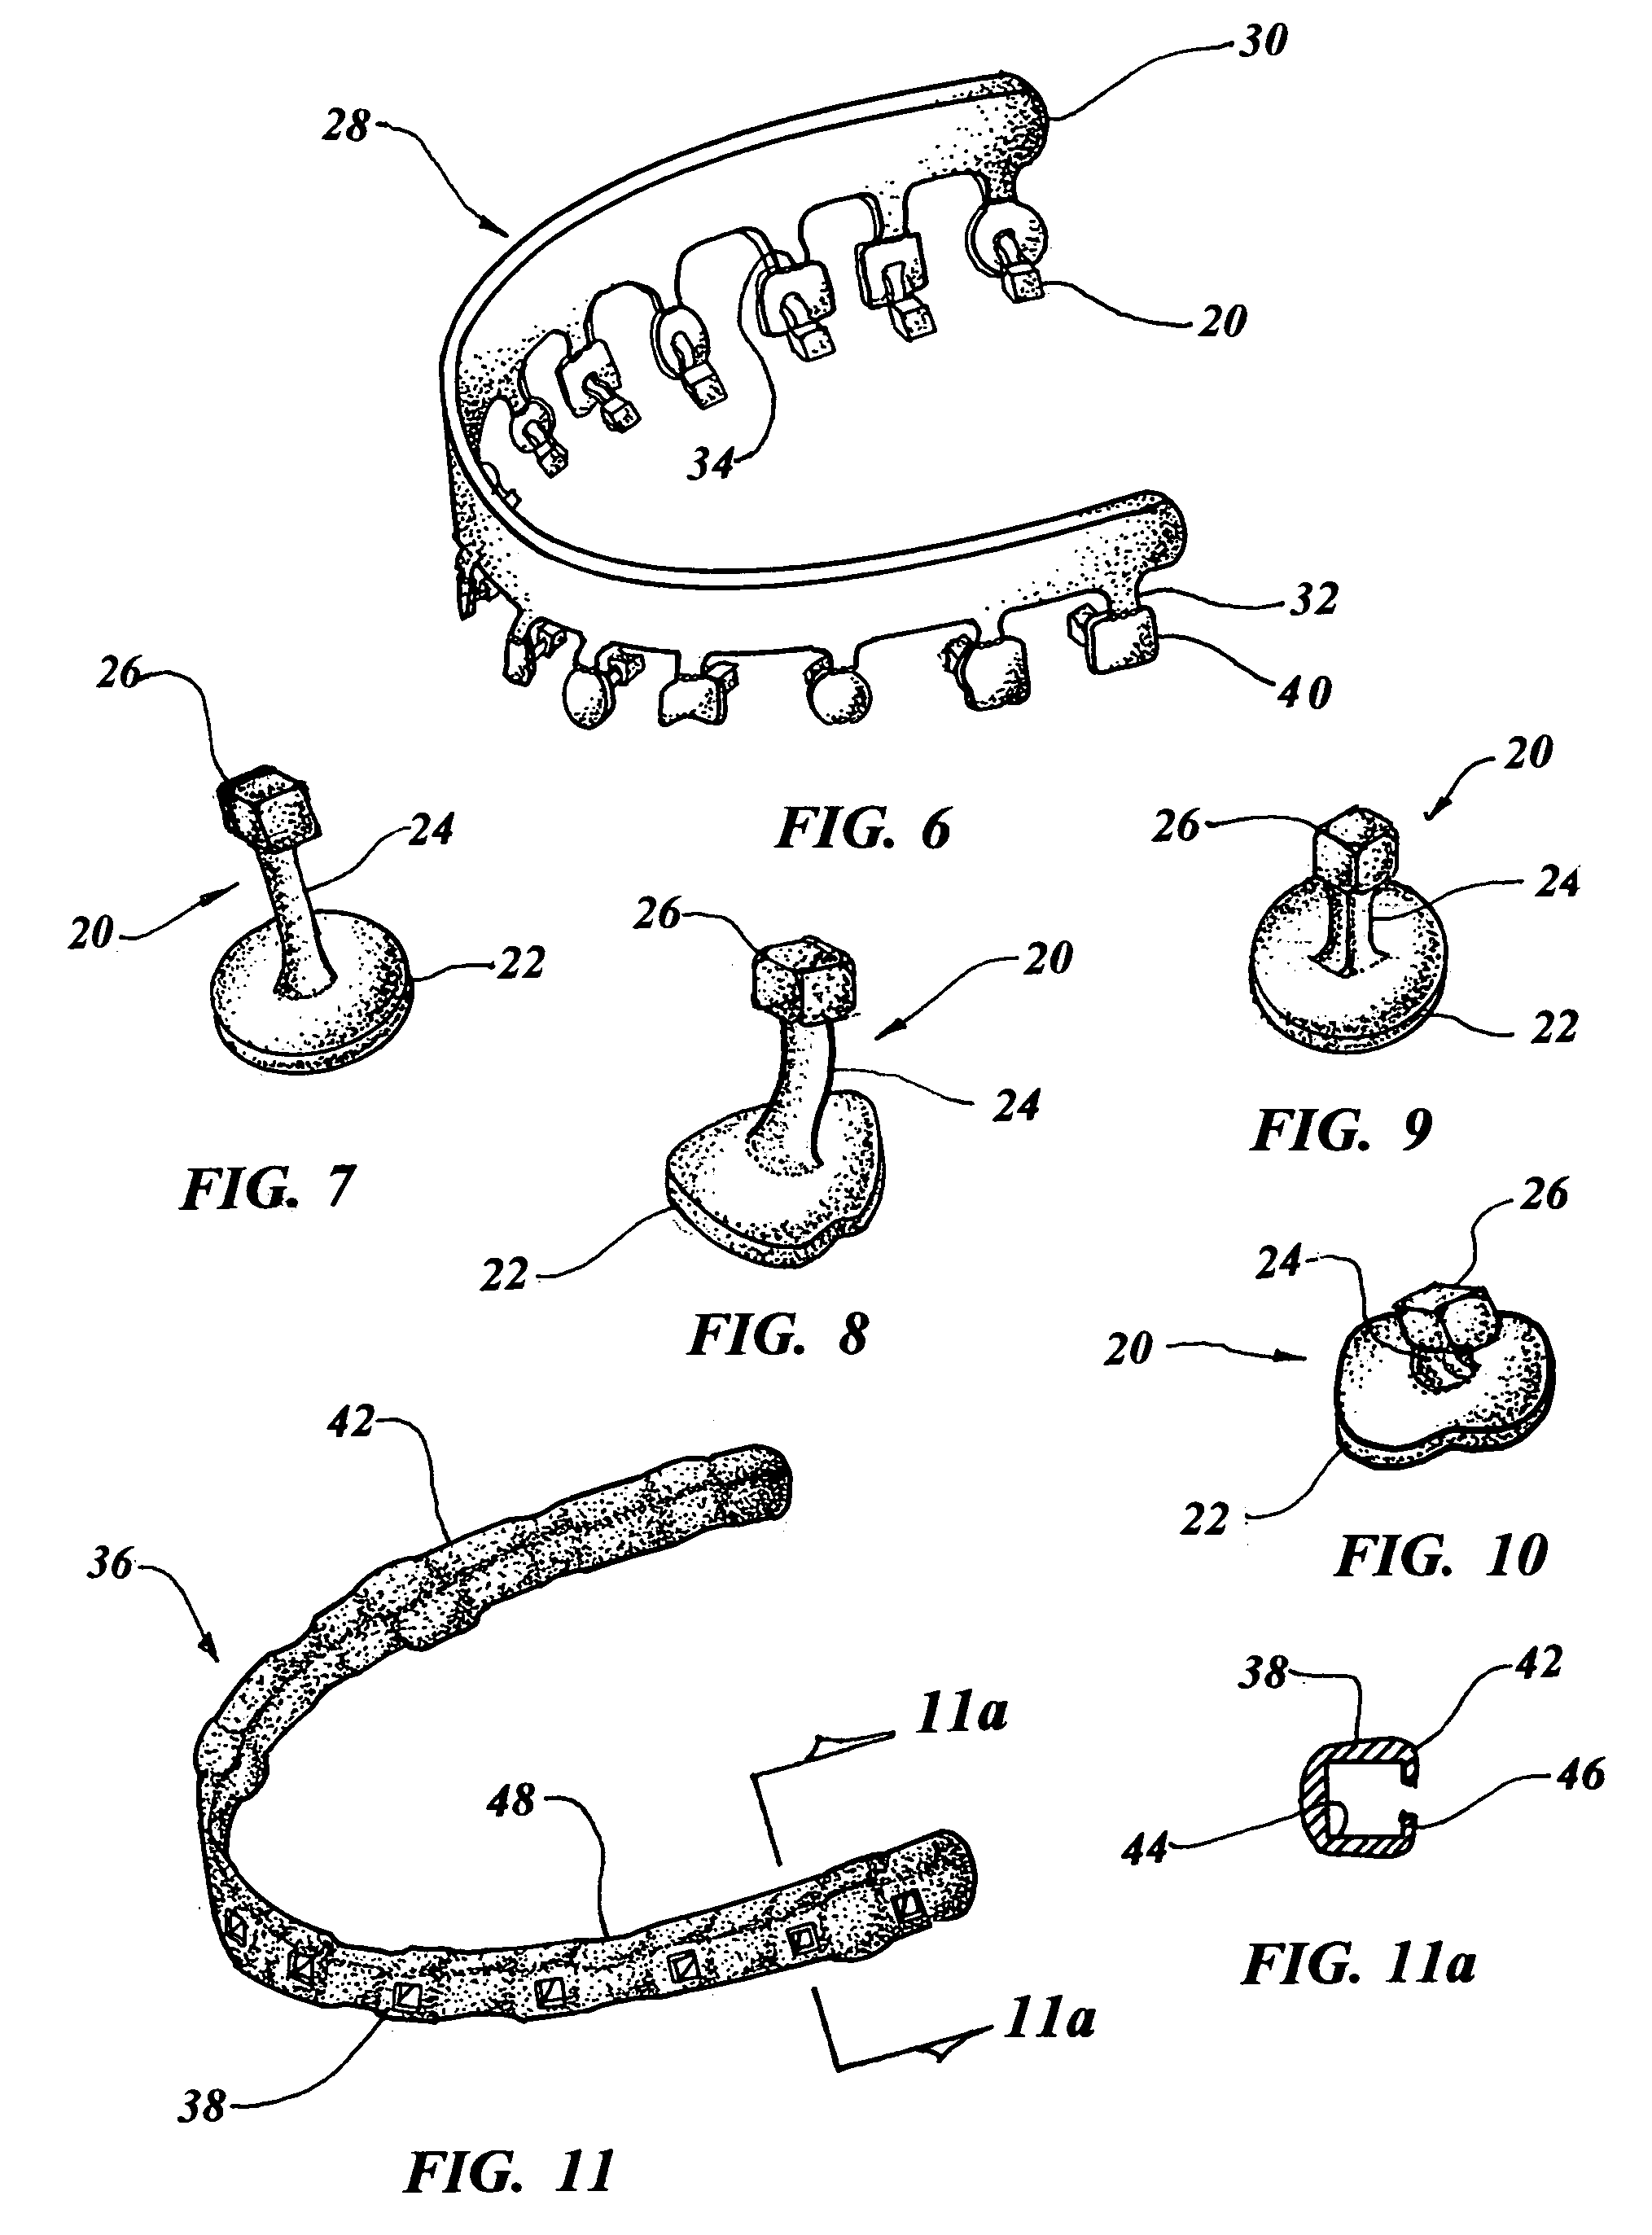 Computer configured appliance for orthodontic correction of malocclusions